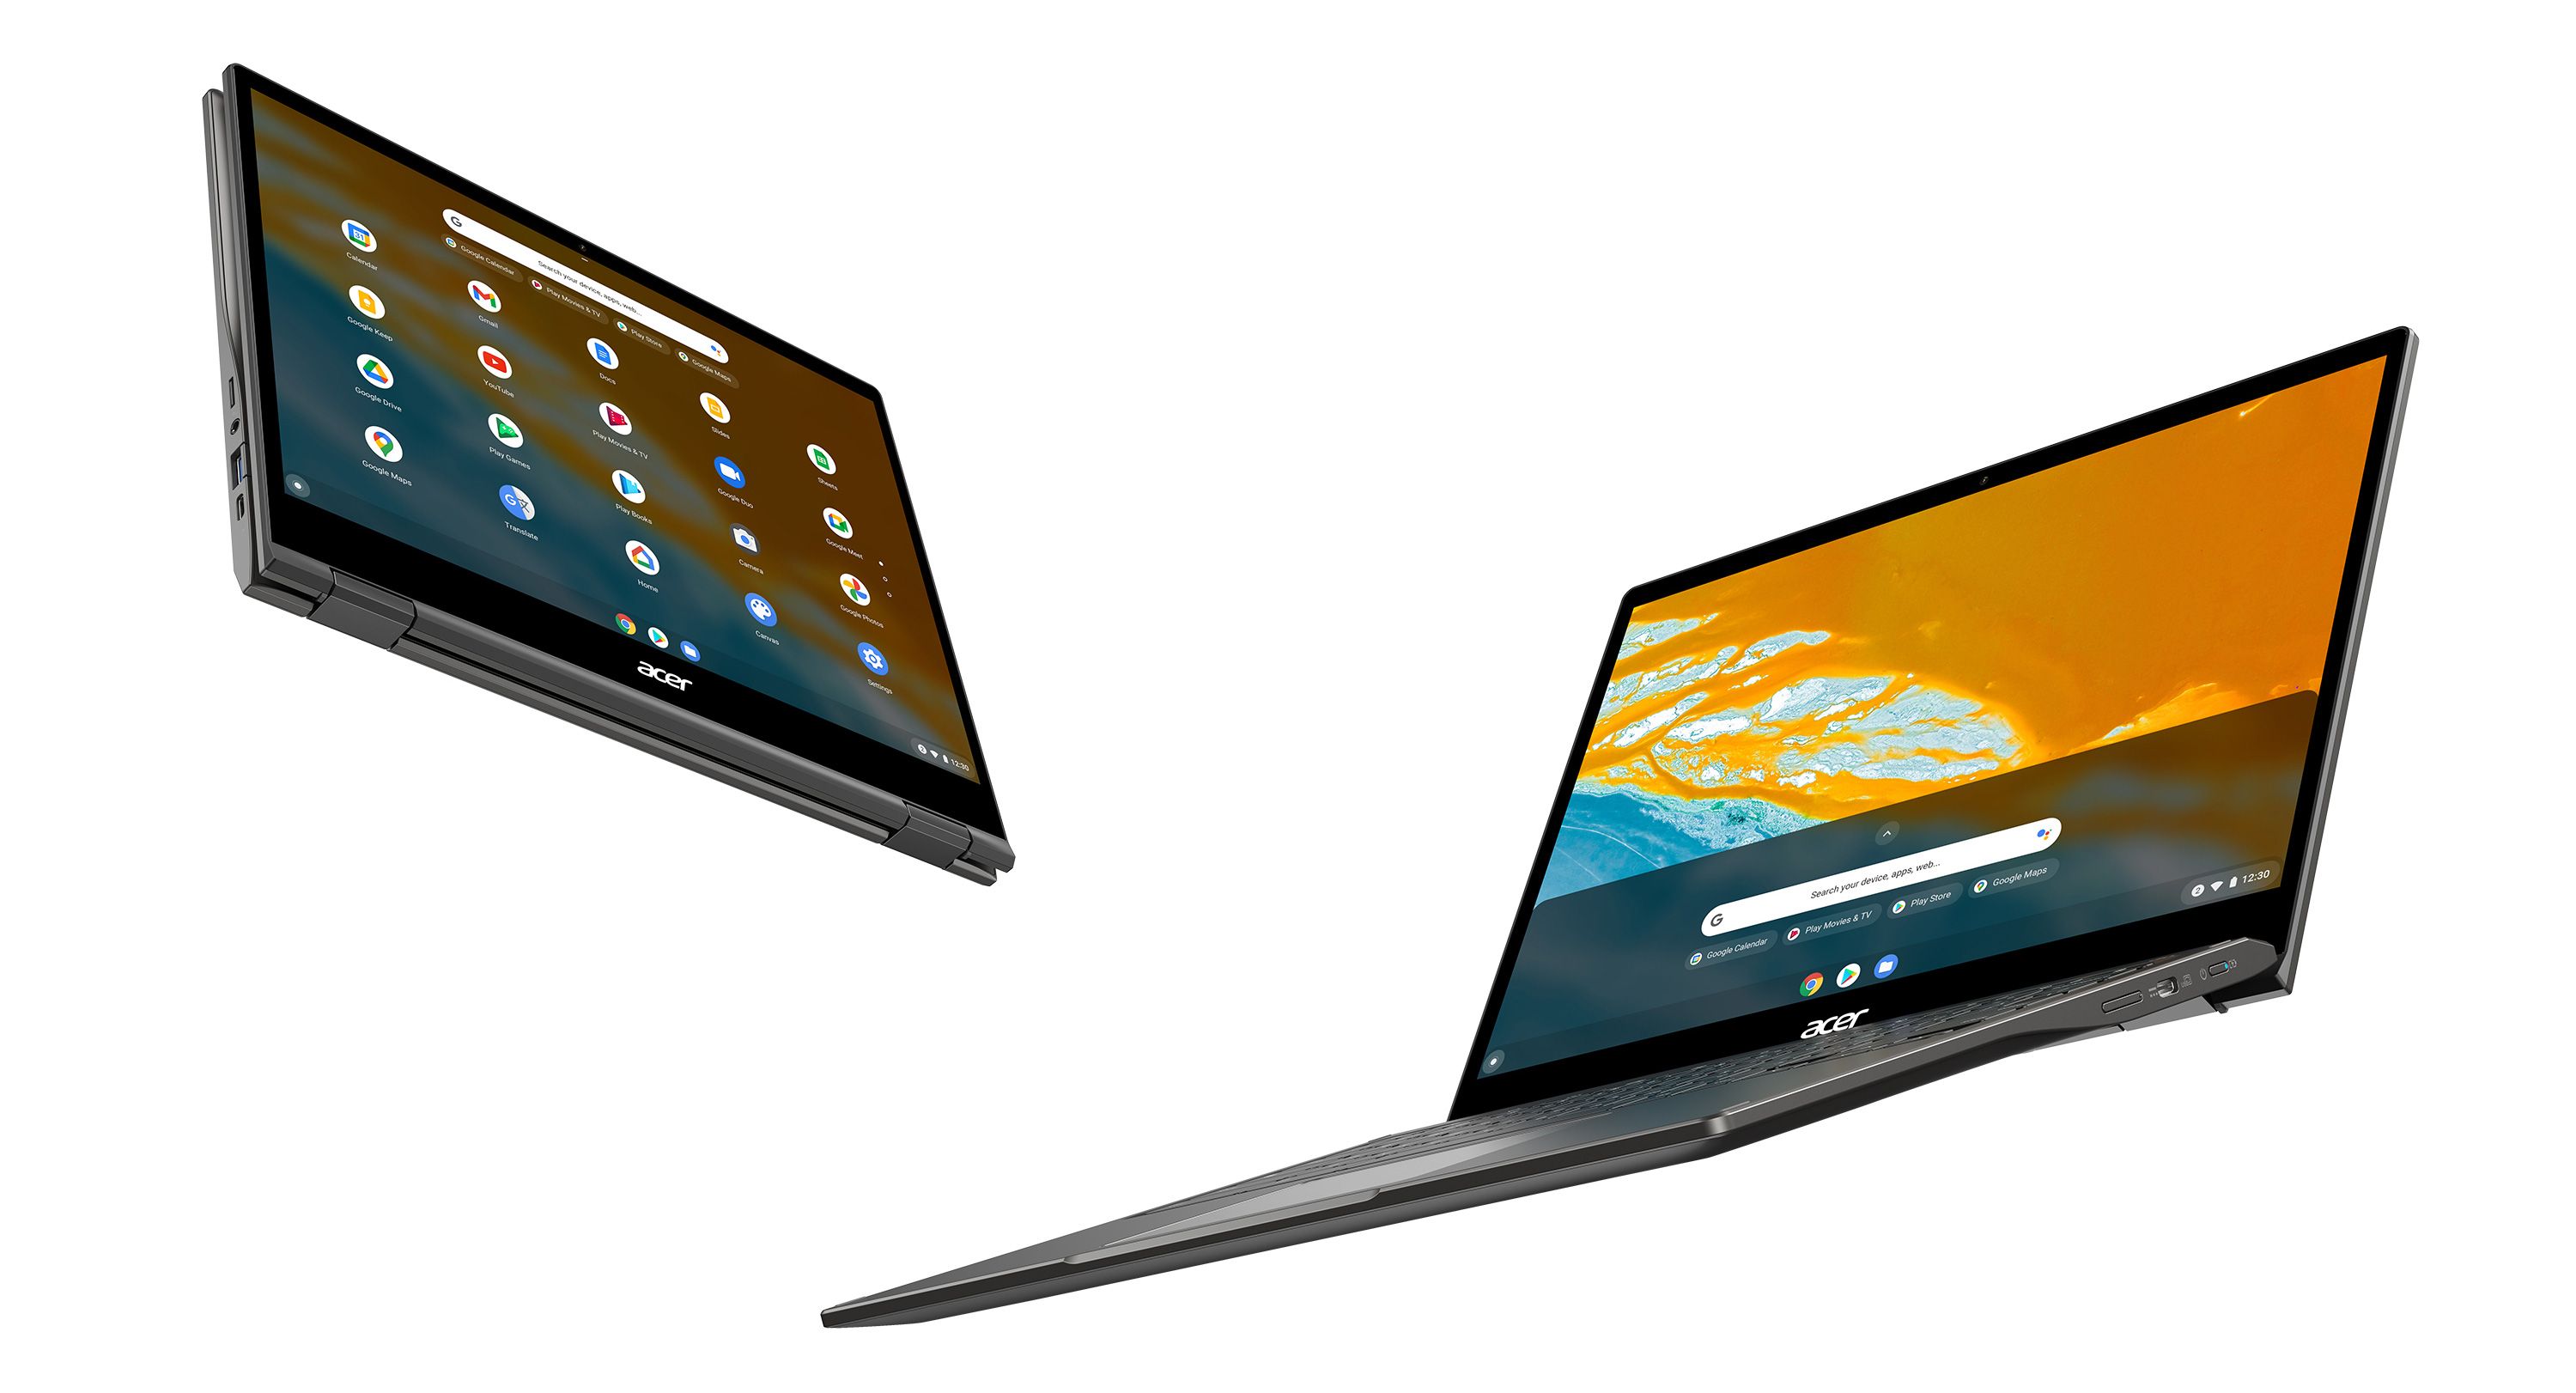 Acer intros three new Chromebooks with productivity and affordability